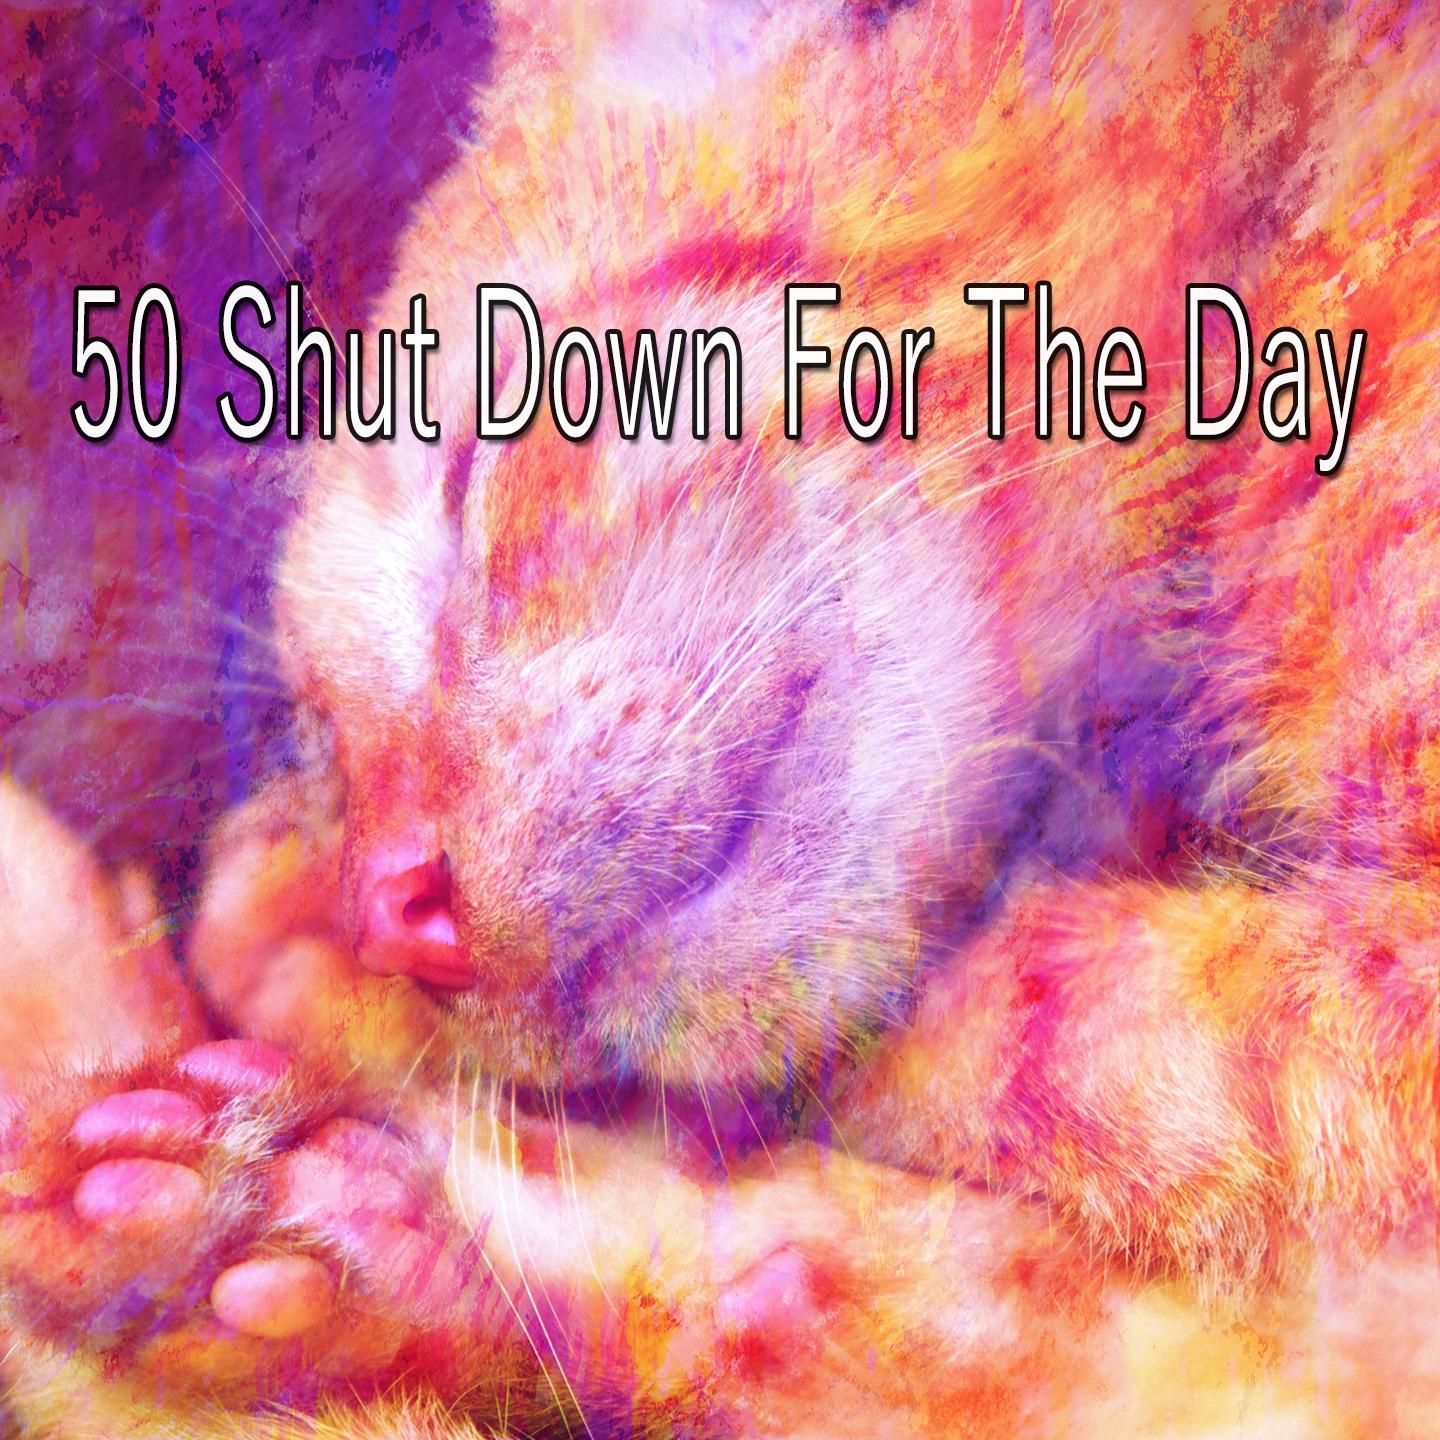 50 Shut Down for the Day